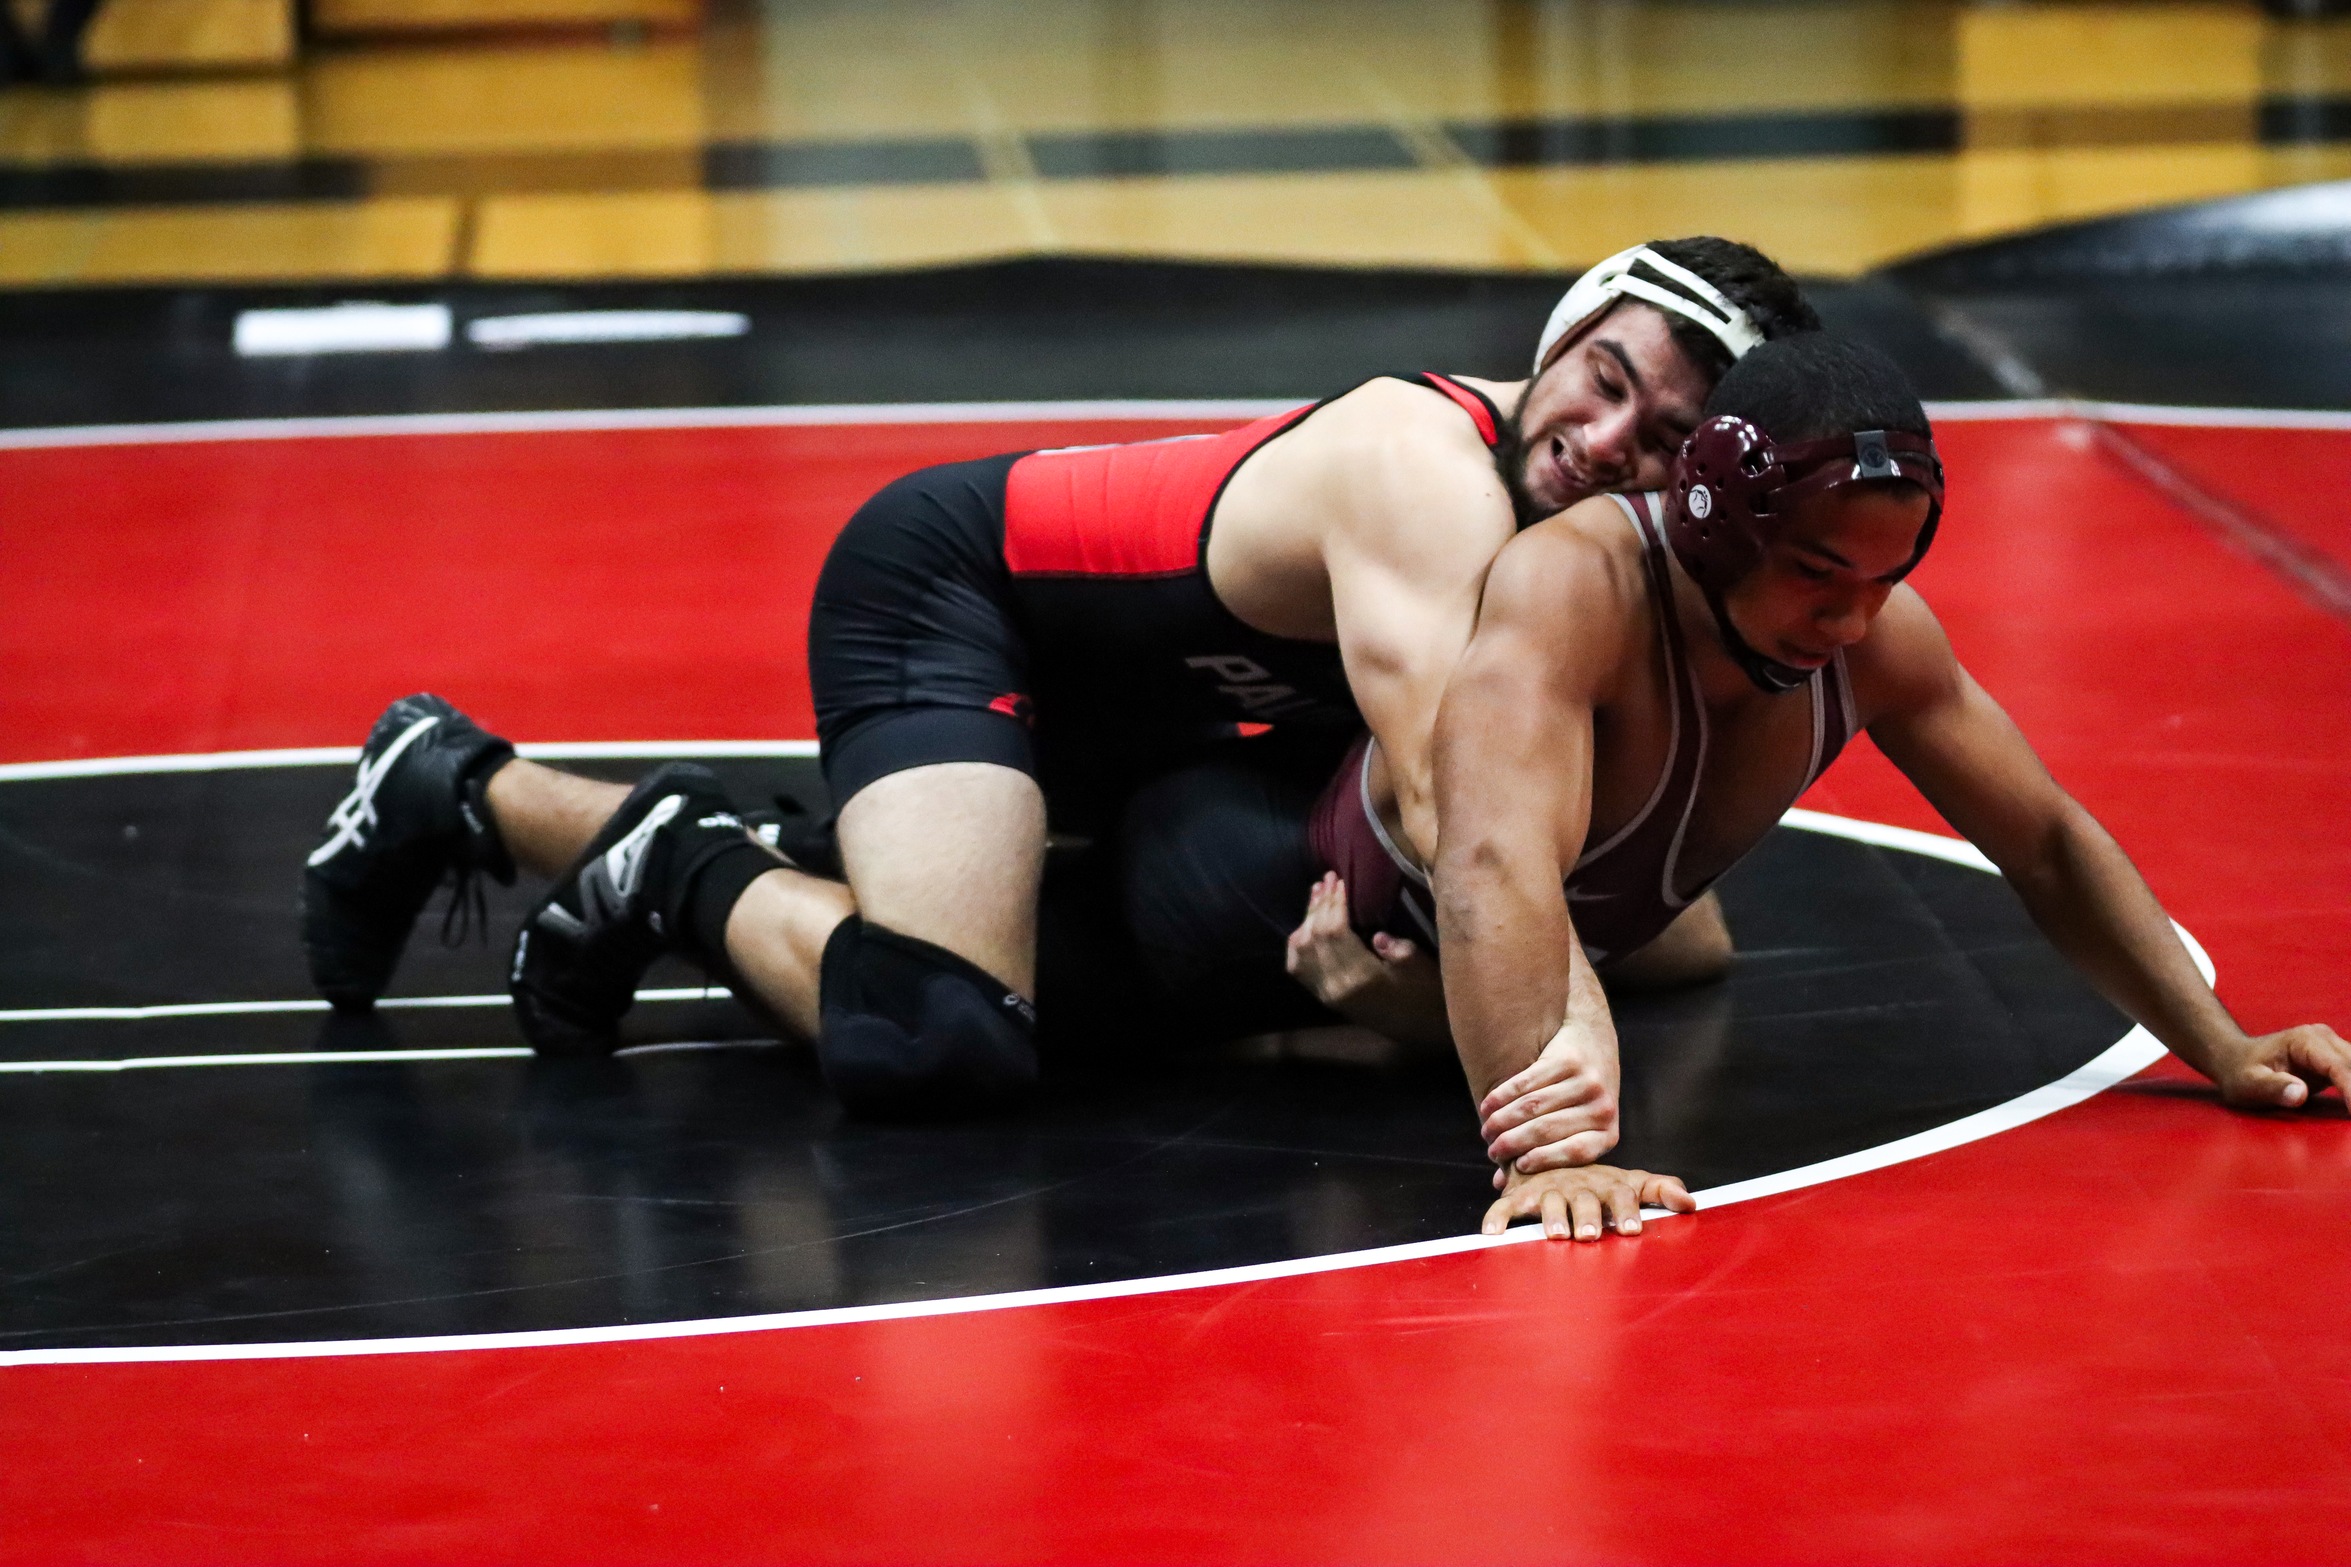 DJ Weimer won his match during the Consolation/Semis against Santa Ana College. Photo by Cara Heise.